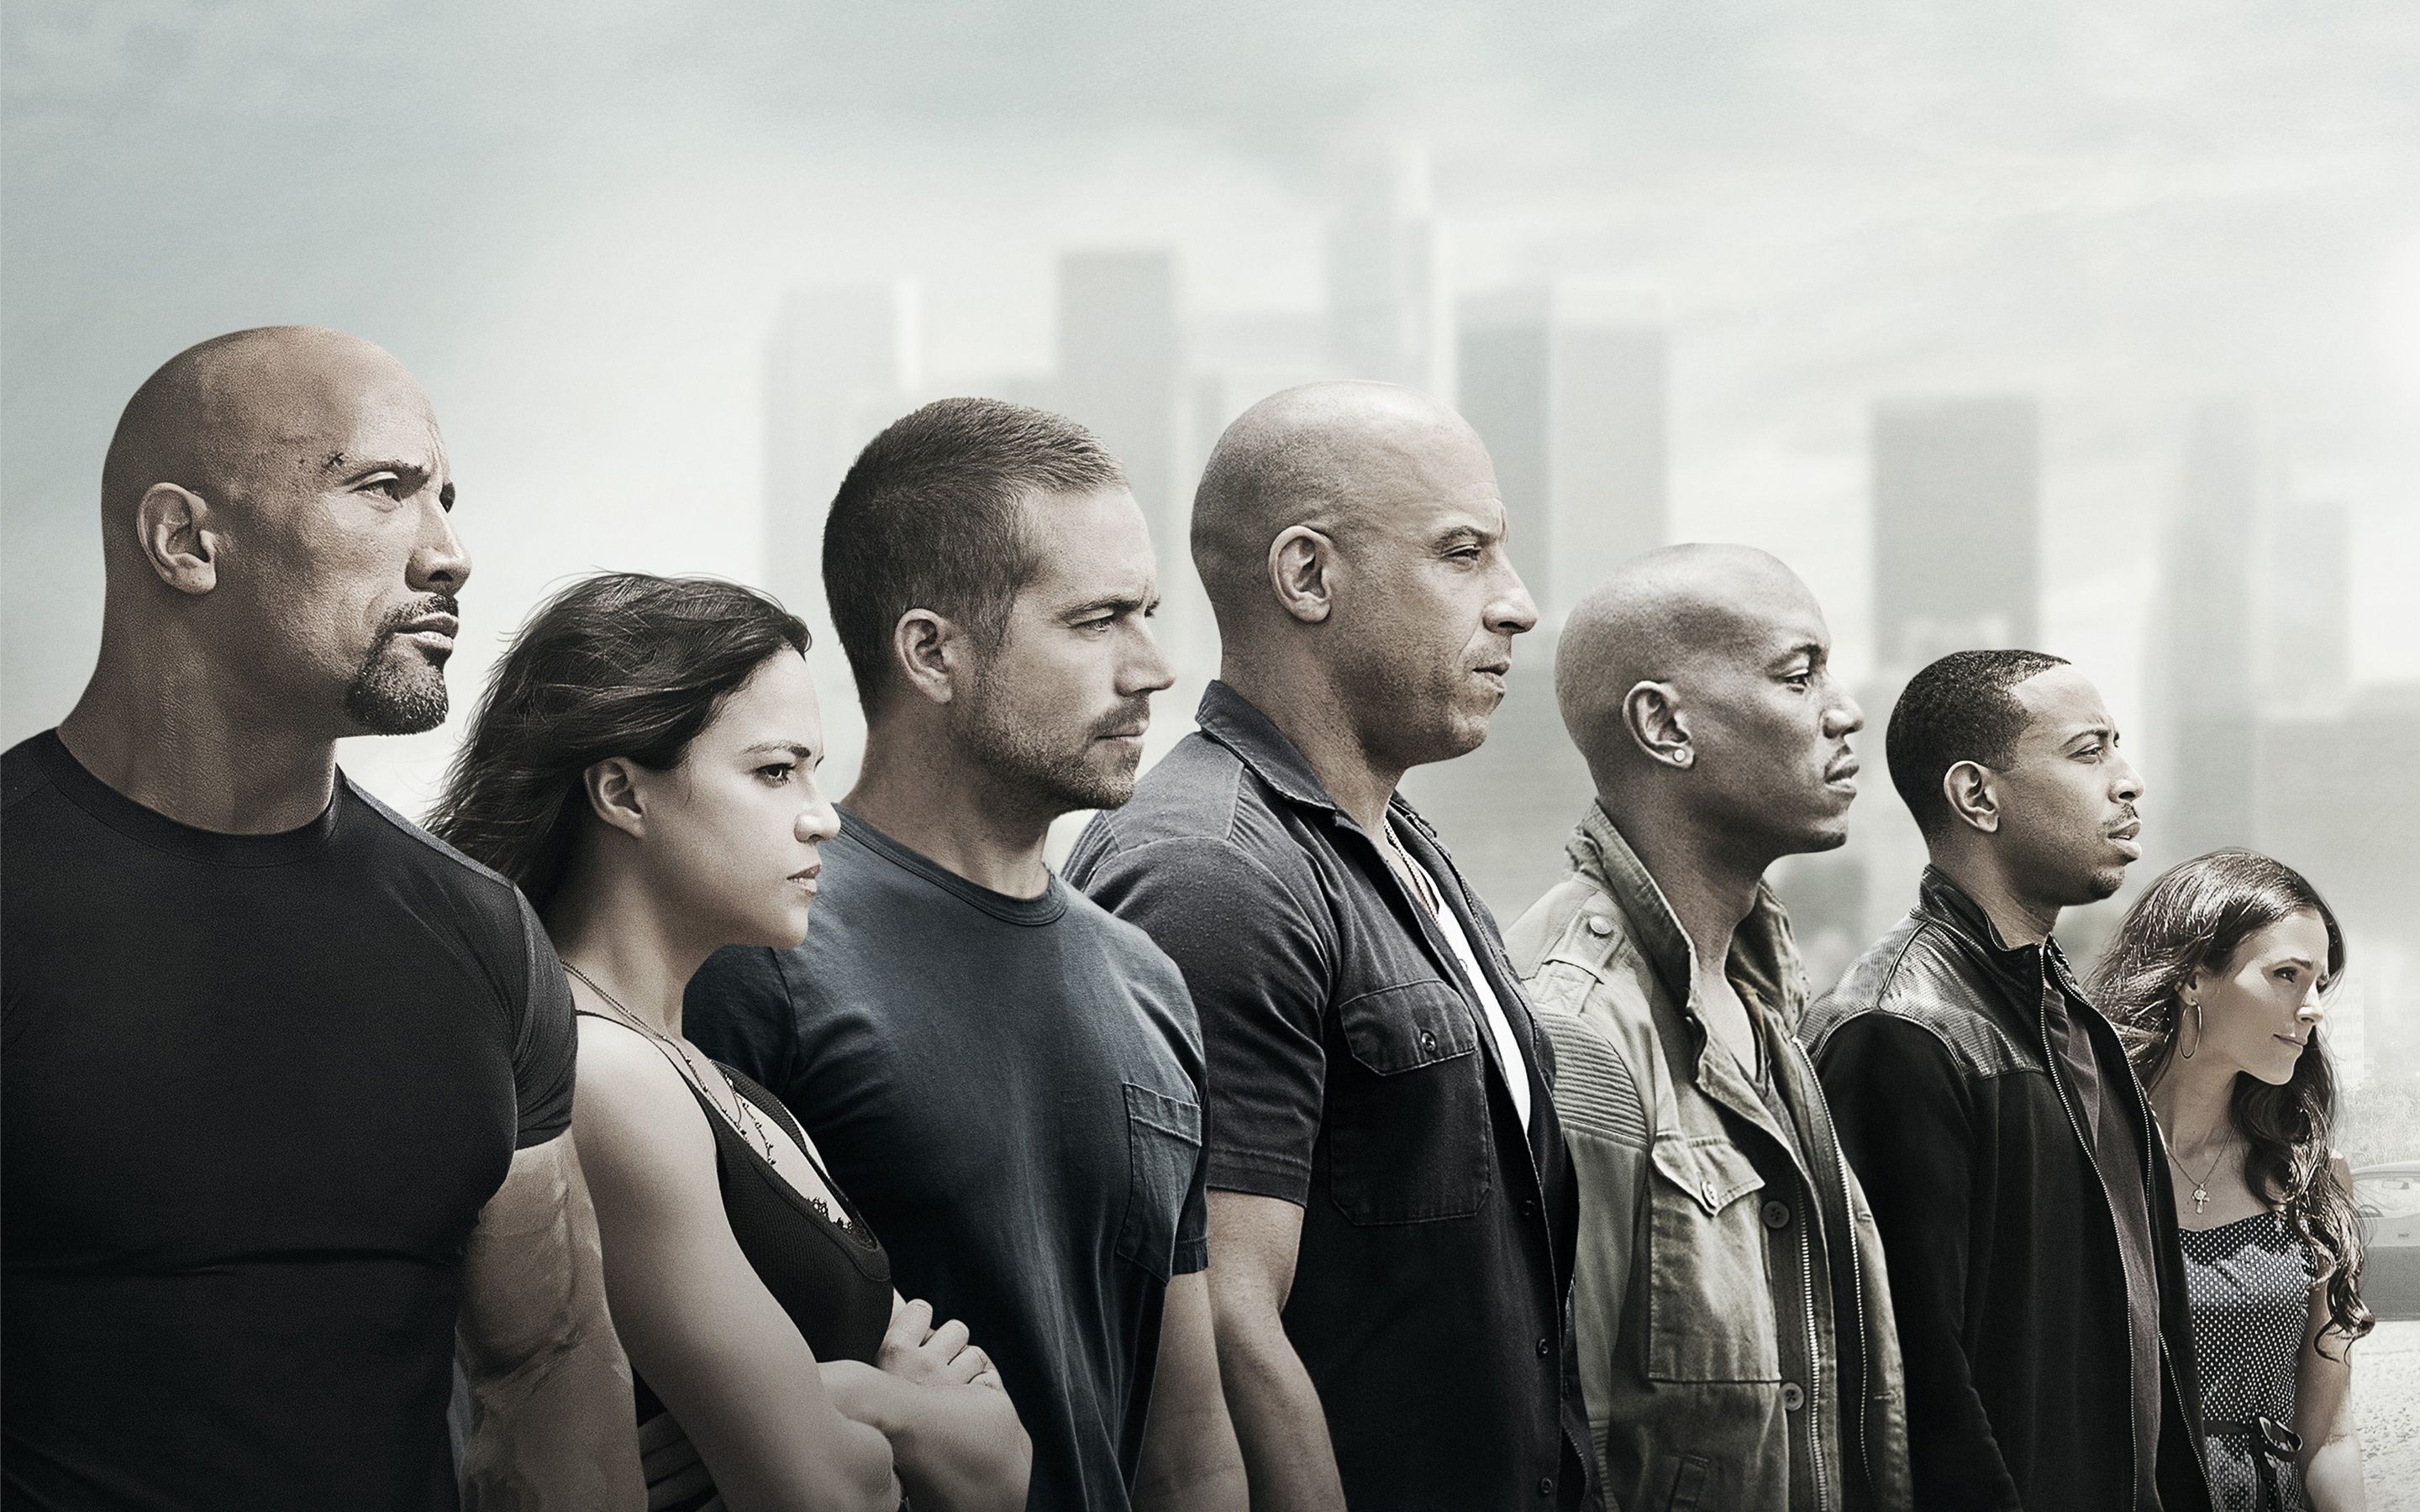 Top Fast And Furious 7 Wallpaper FULL HD 1080p For PC Desktop. Fast and furious, Vin diesel, Furious 7 movie